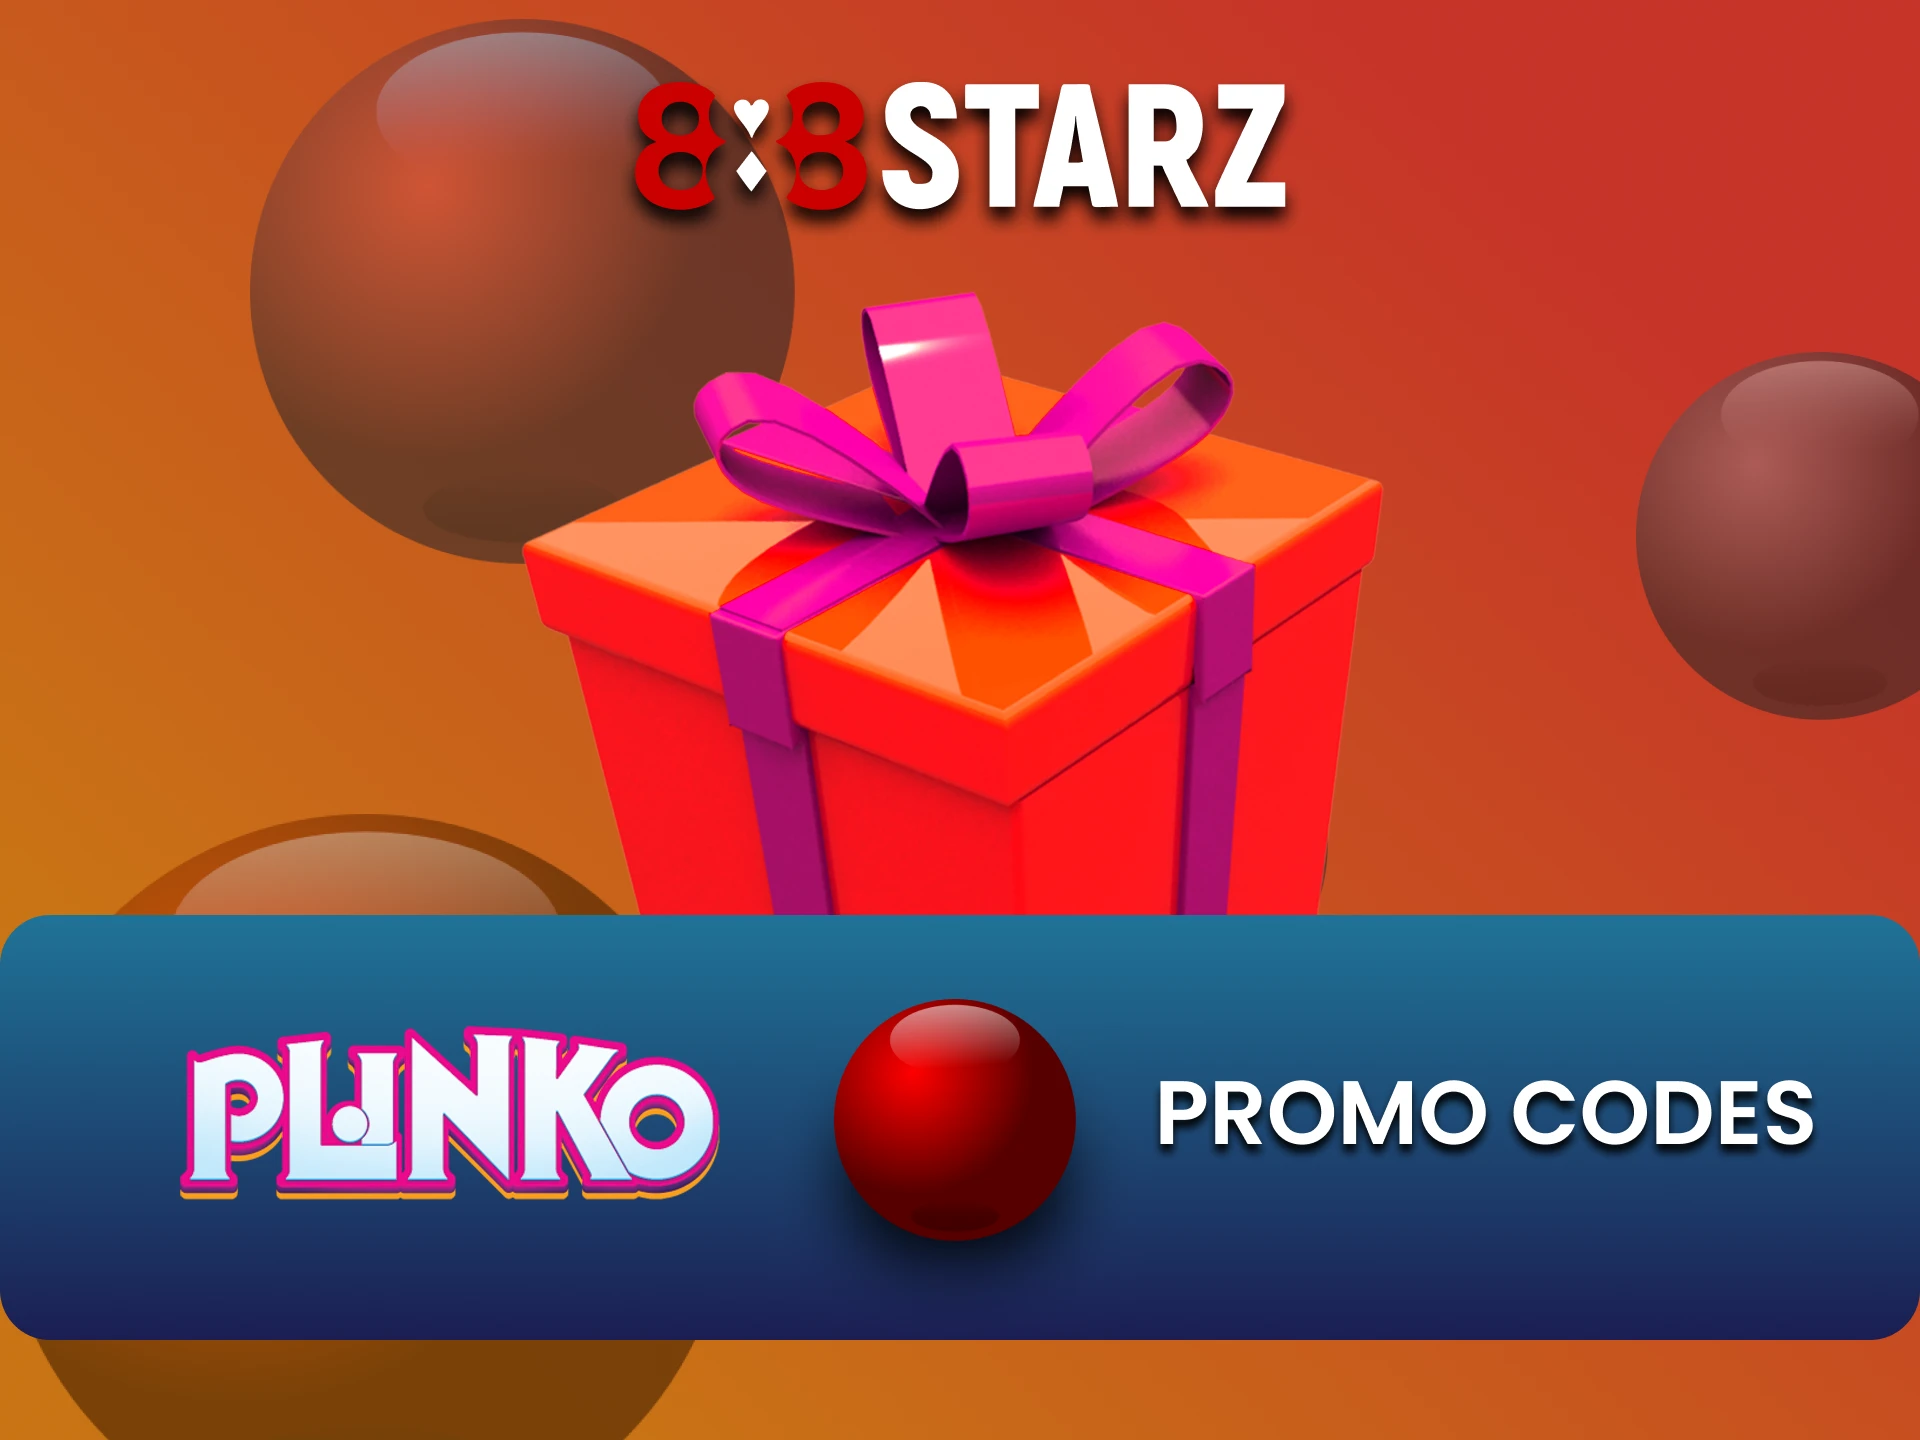 888starz gives a bonus for playing Plinko if use a promo code.